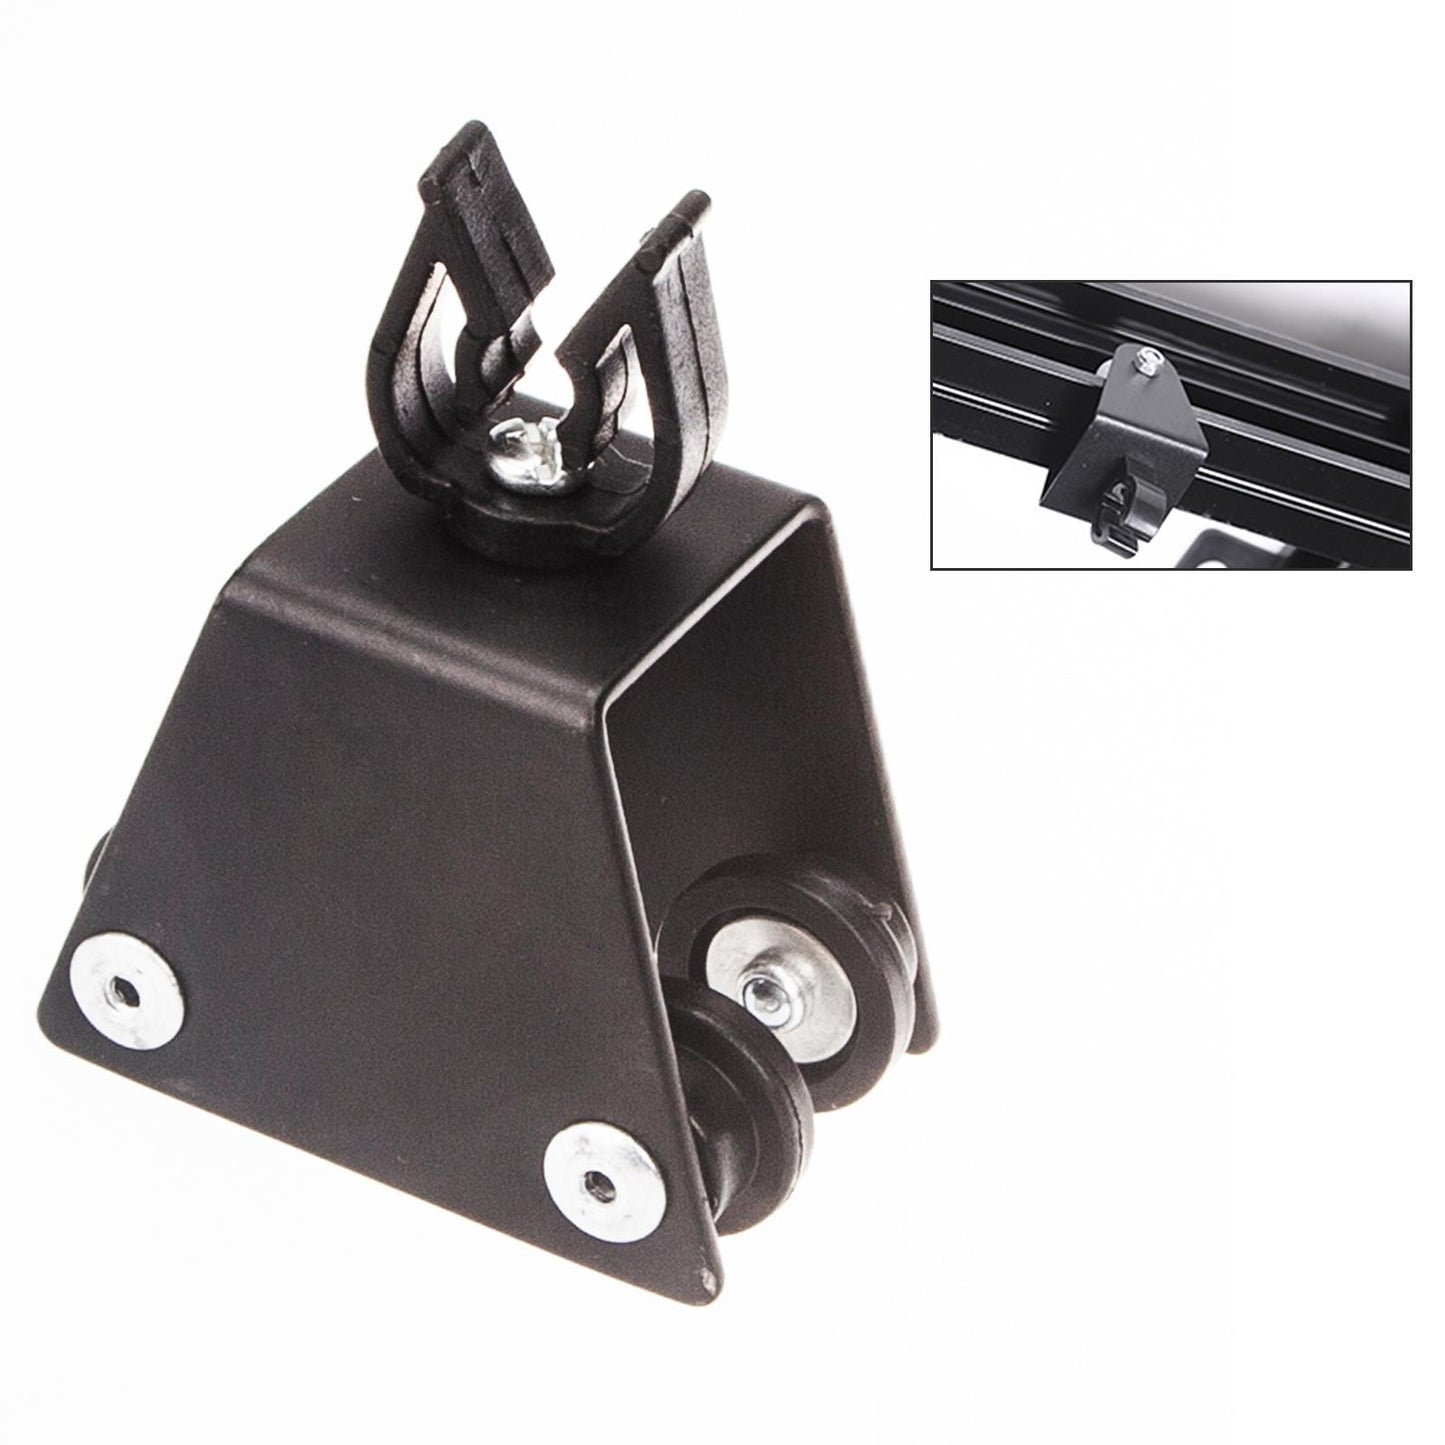 Cable Pulley Replacement for Pantograph Ceiling Rail System